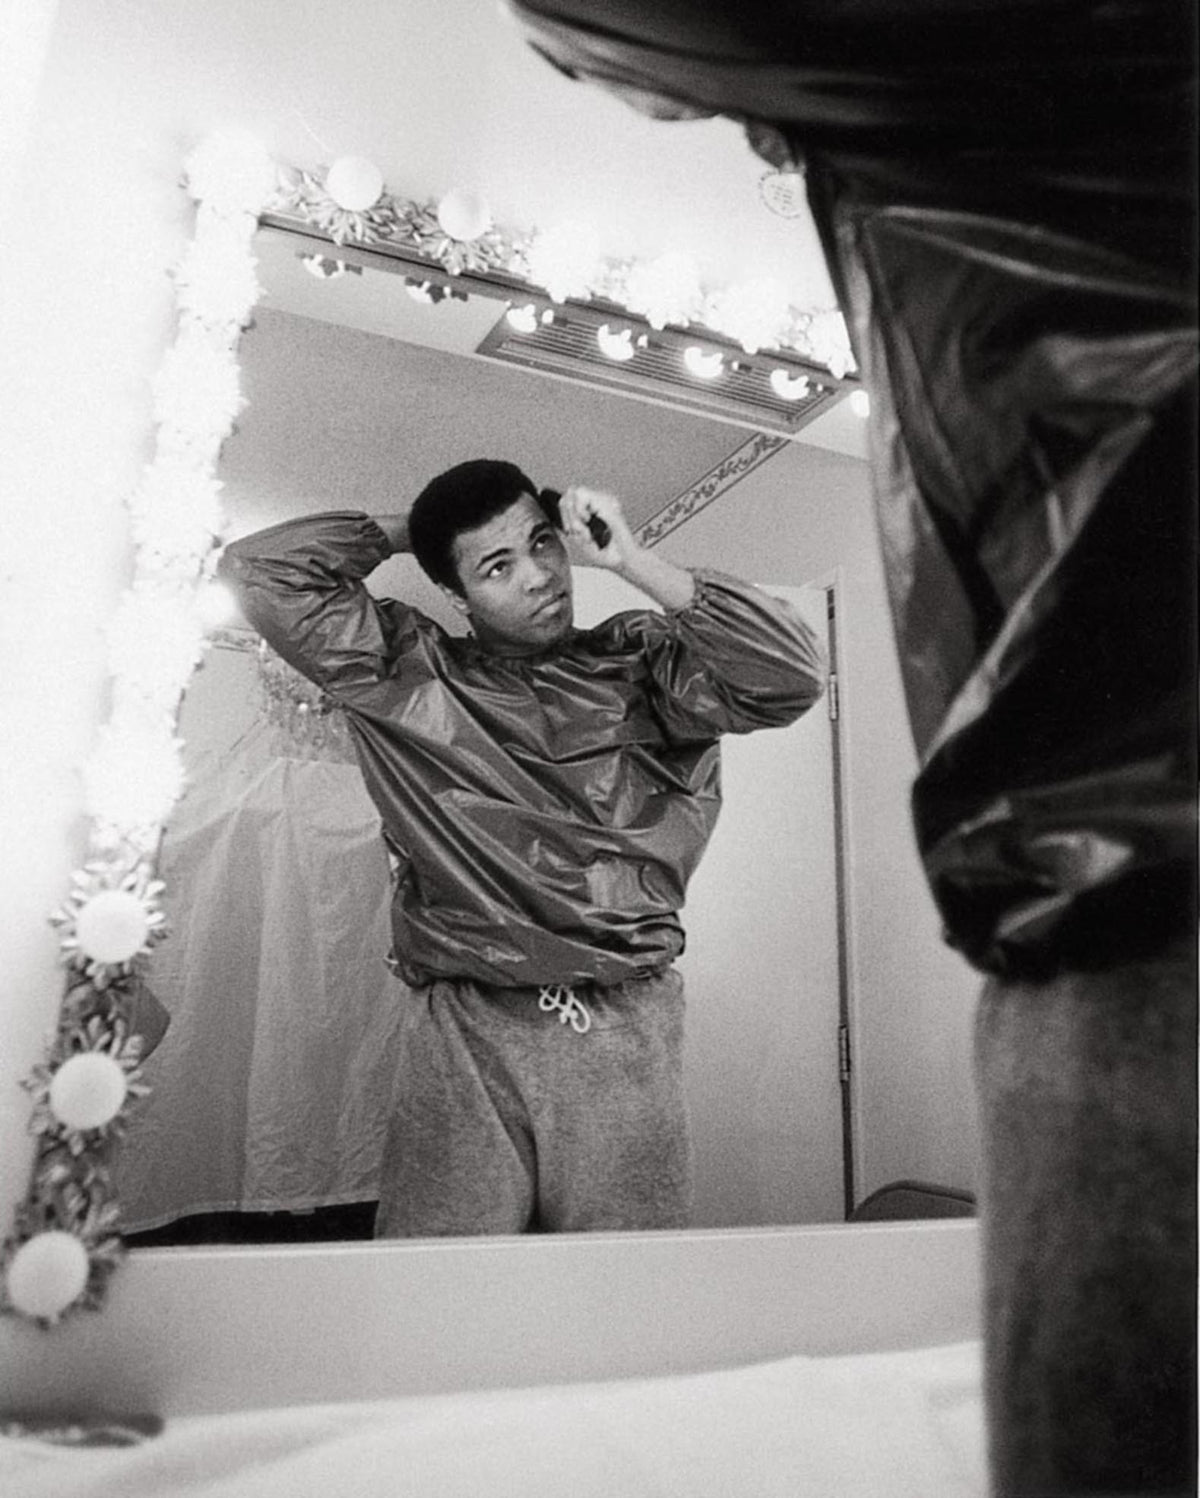 Muhammad Ali Combing Hair in the Mirror Before Bugner Fight